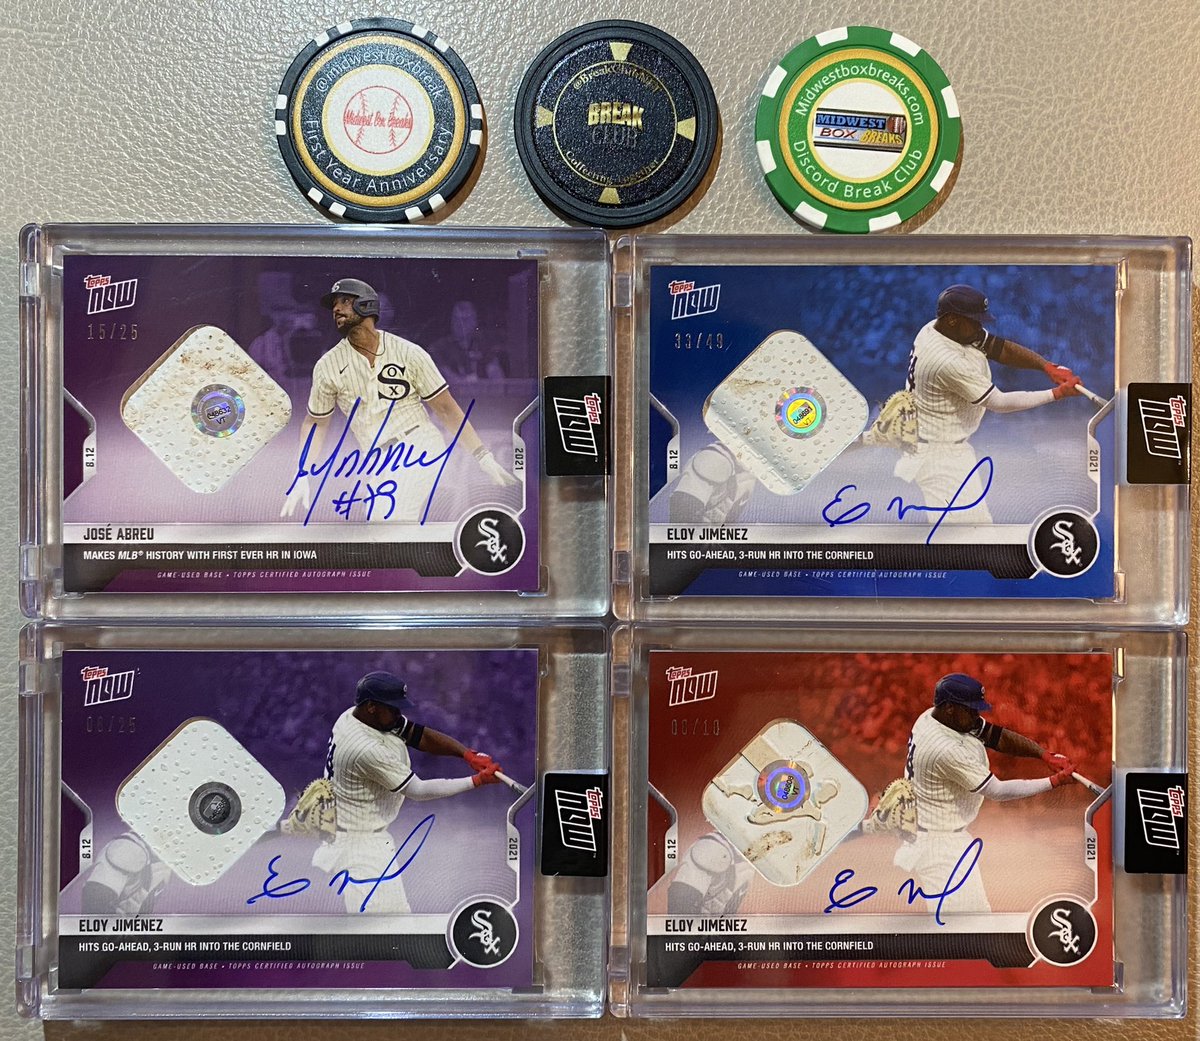 @midwestboxbreak @PhilsPulls @BreakClubNFT 2021 Topps Now Inaugural Field of Dreams game White Sox auto relics…open to trades (TV) Jose Abreu purple /25 - $475 (500) Eloy blue /49 - $400 (425) Eloy purple /25 - $550 (600) Eloy red /10 - $750 (800)